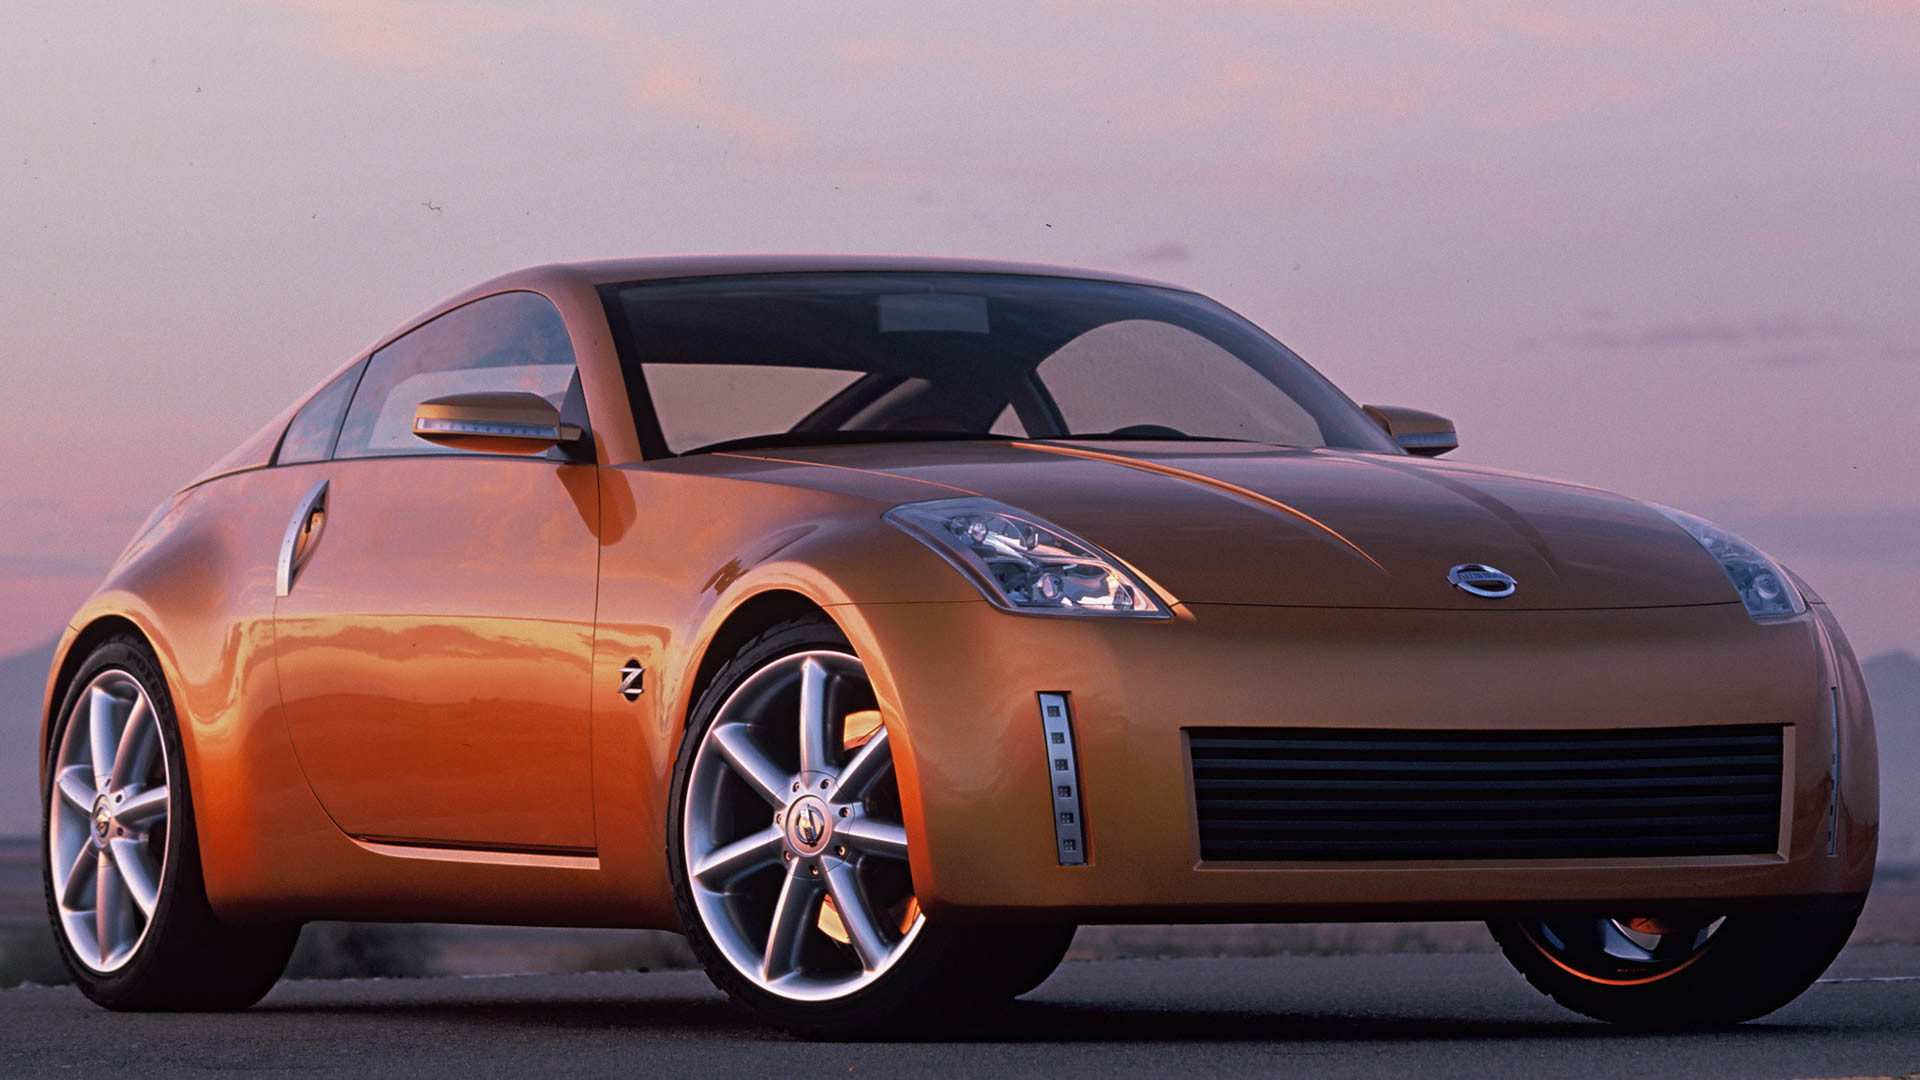 The Nissan 350Z Saved the ‘Soul’ of the Company, Design Boss Says